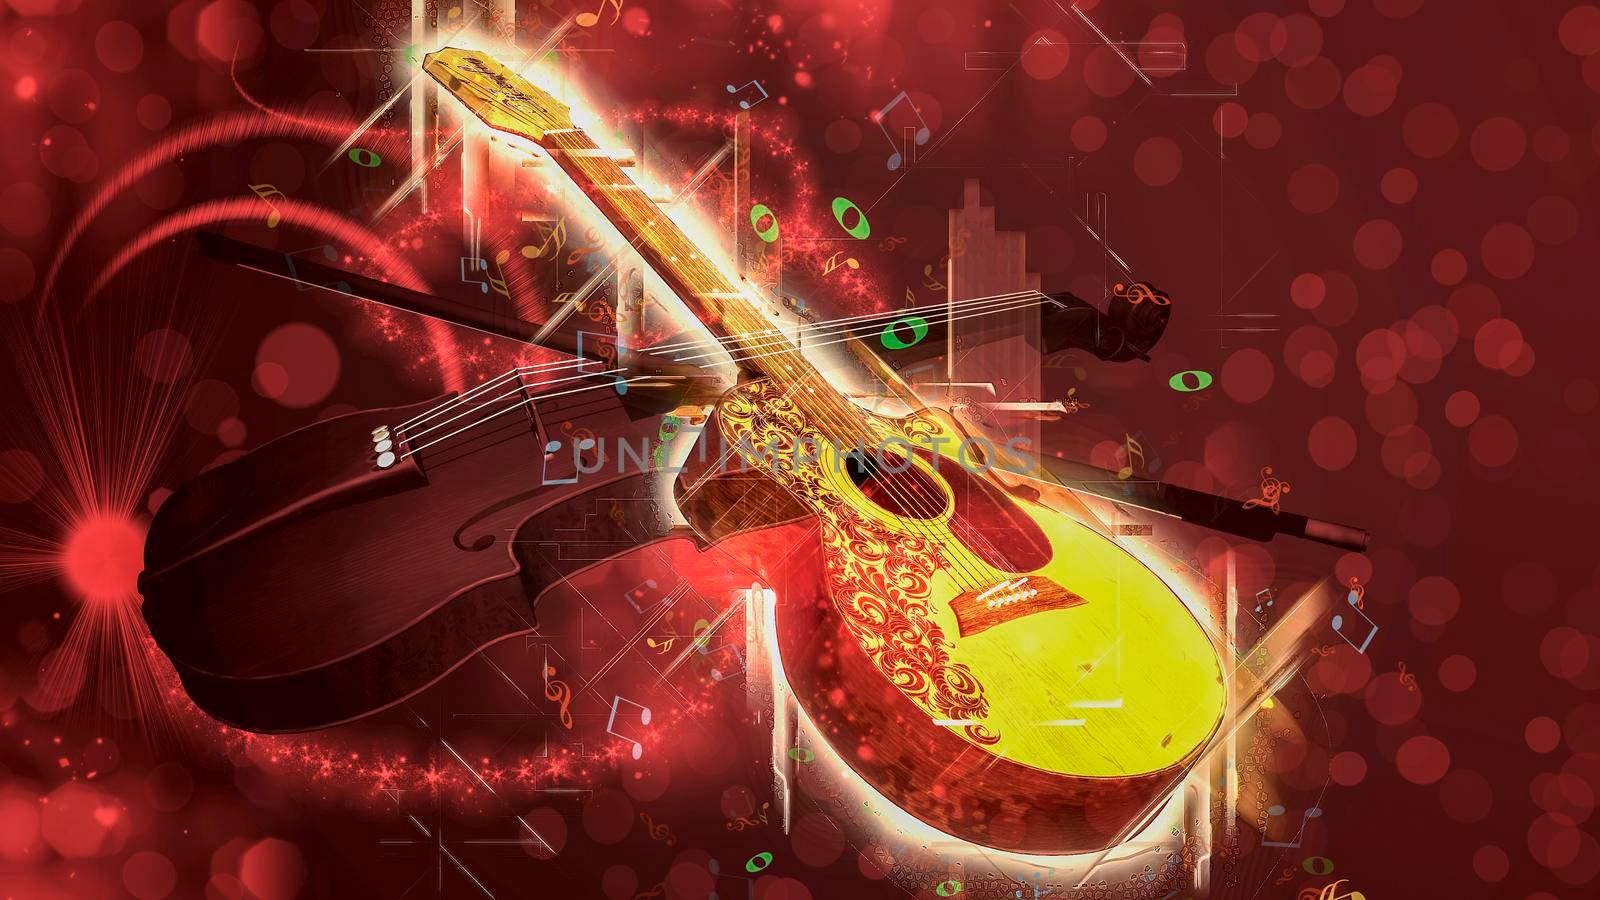 Acoustic classical guitar and violin on black background with music notes by ankarb